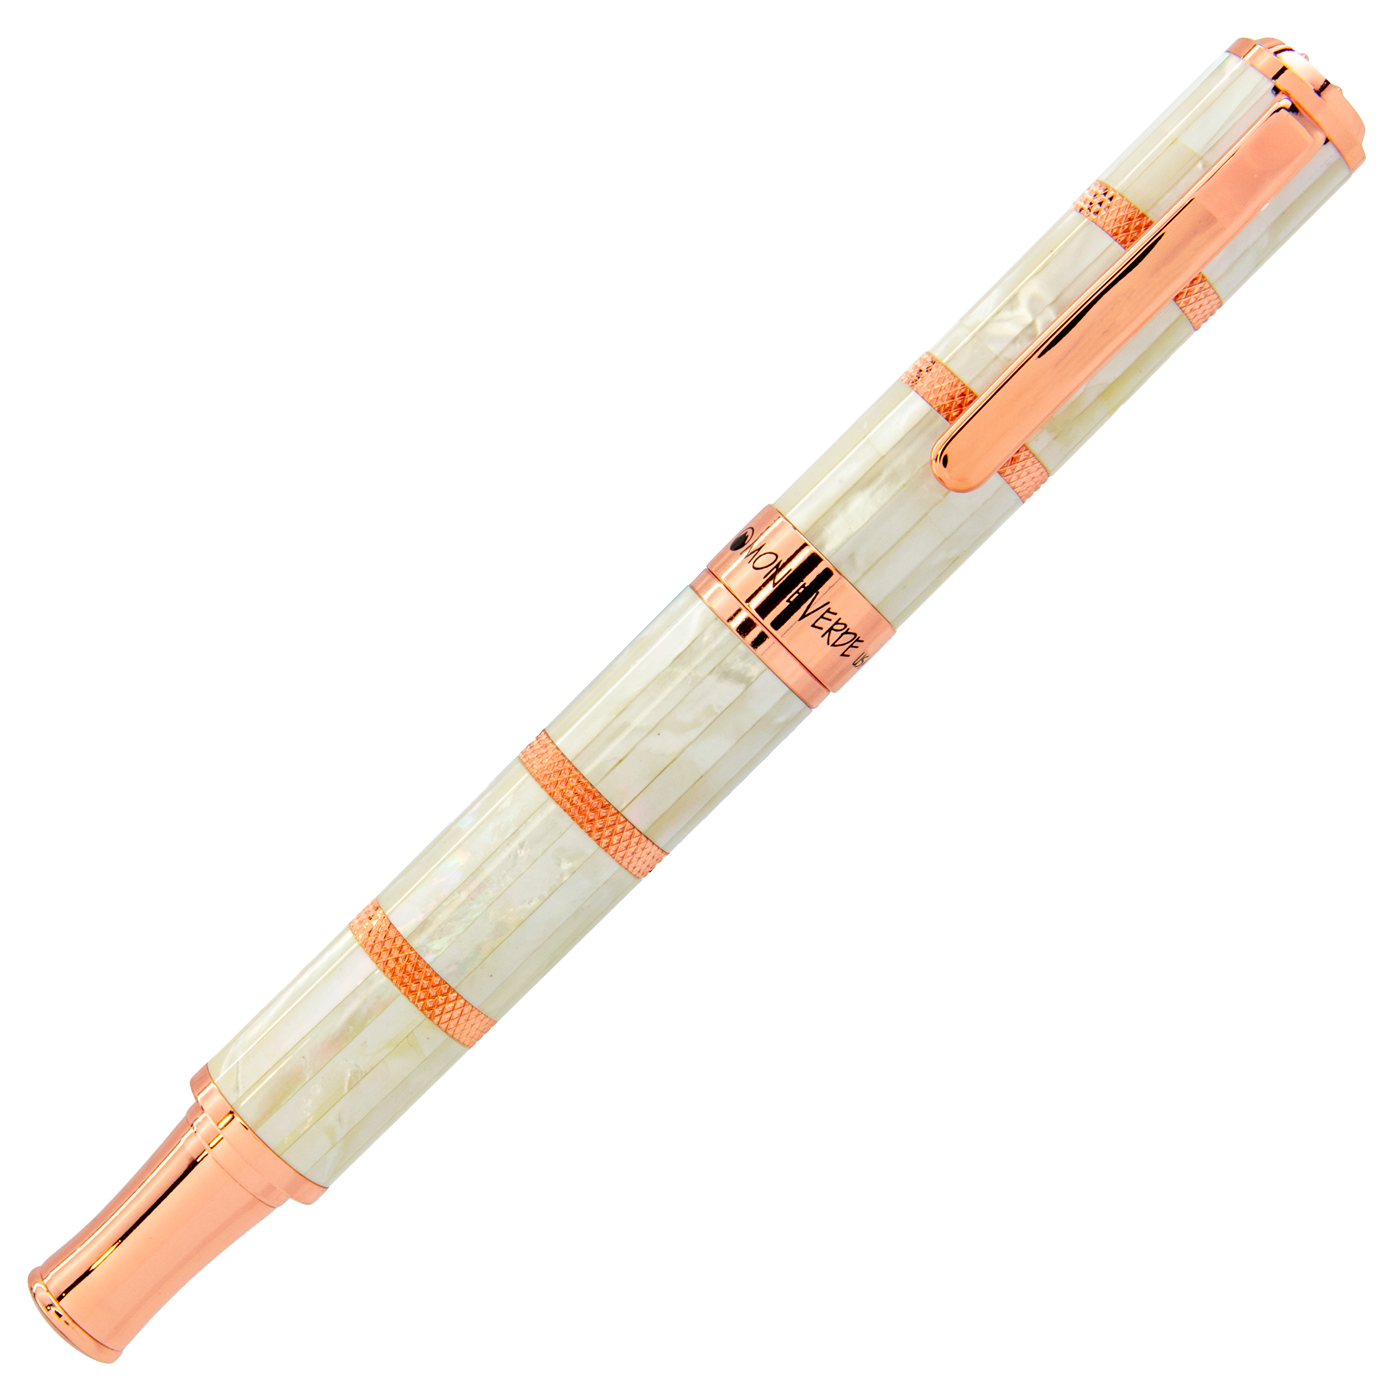 Monteverde Regatta Mother of Pearl w/ Rose Gold Trim Limited Edition Rollerball